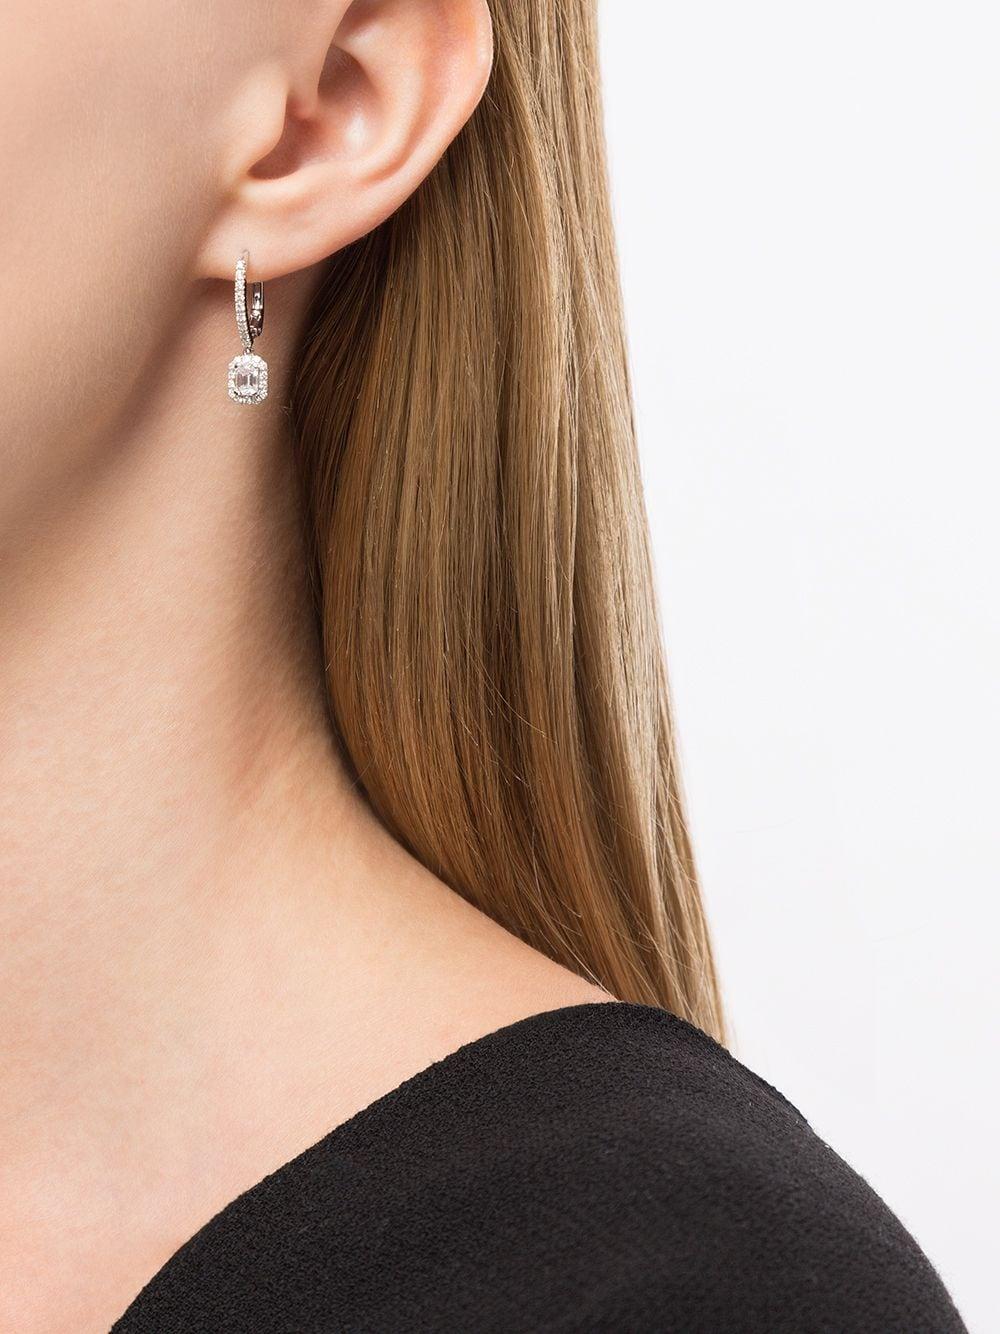 AS29
18kt white gold Mye pave diamond drop hoop earrings

There's nothing that a piece of jewellery can't fix! Crafted from 18kt white gold, these Mye pave diamond drop hoop earrings from AS29 have the power to cheer you up even in your worst days.